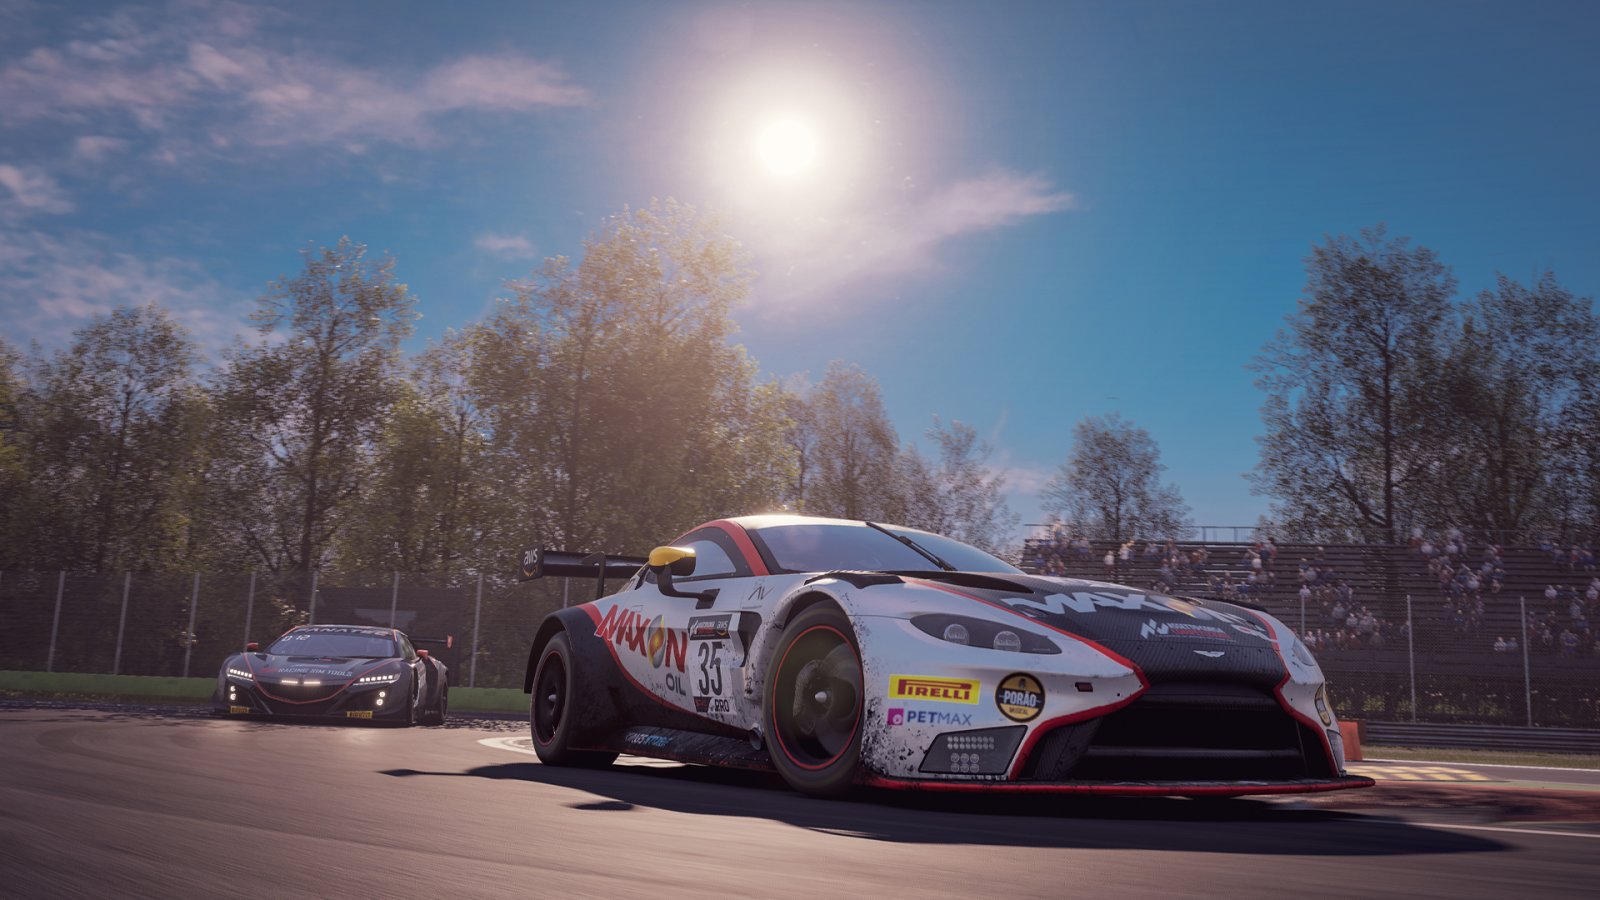 Kings of Asphalt, Aston Martin Break Through for First Endurance Cup Victory at Monza